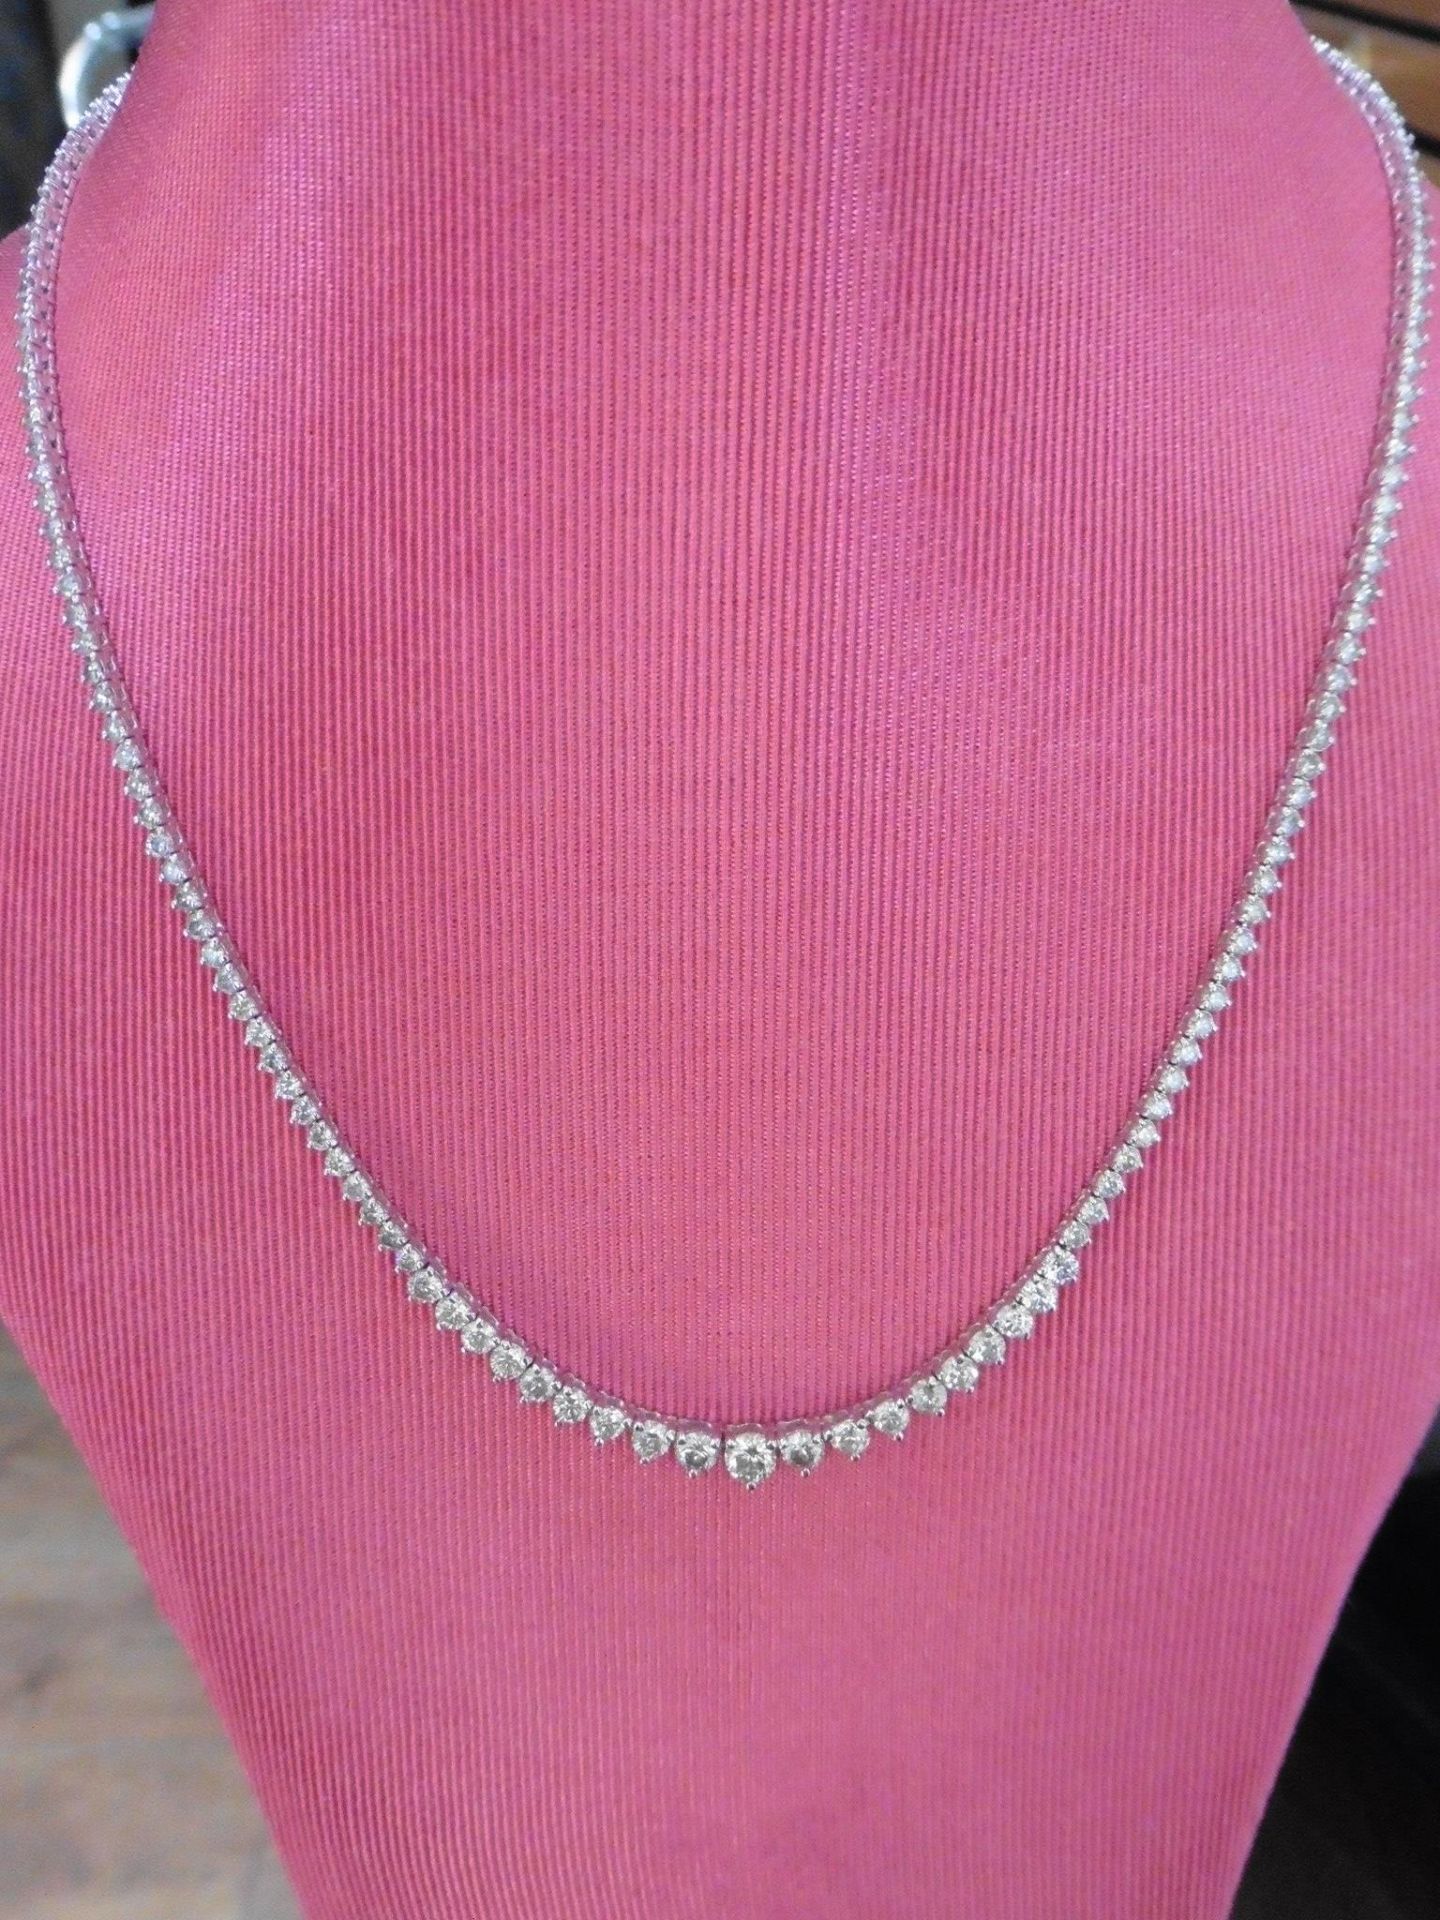 11.75ct Diamond tennis style necklace. 3 claw setting. Graduated diamonds, H colour, Si2 clarity - Image 3 of 3